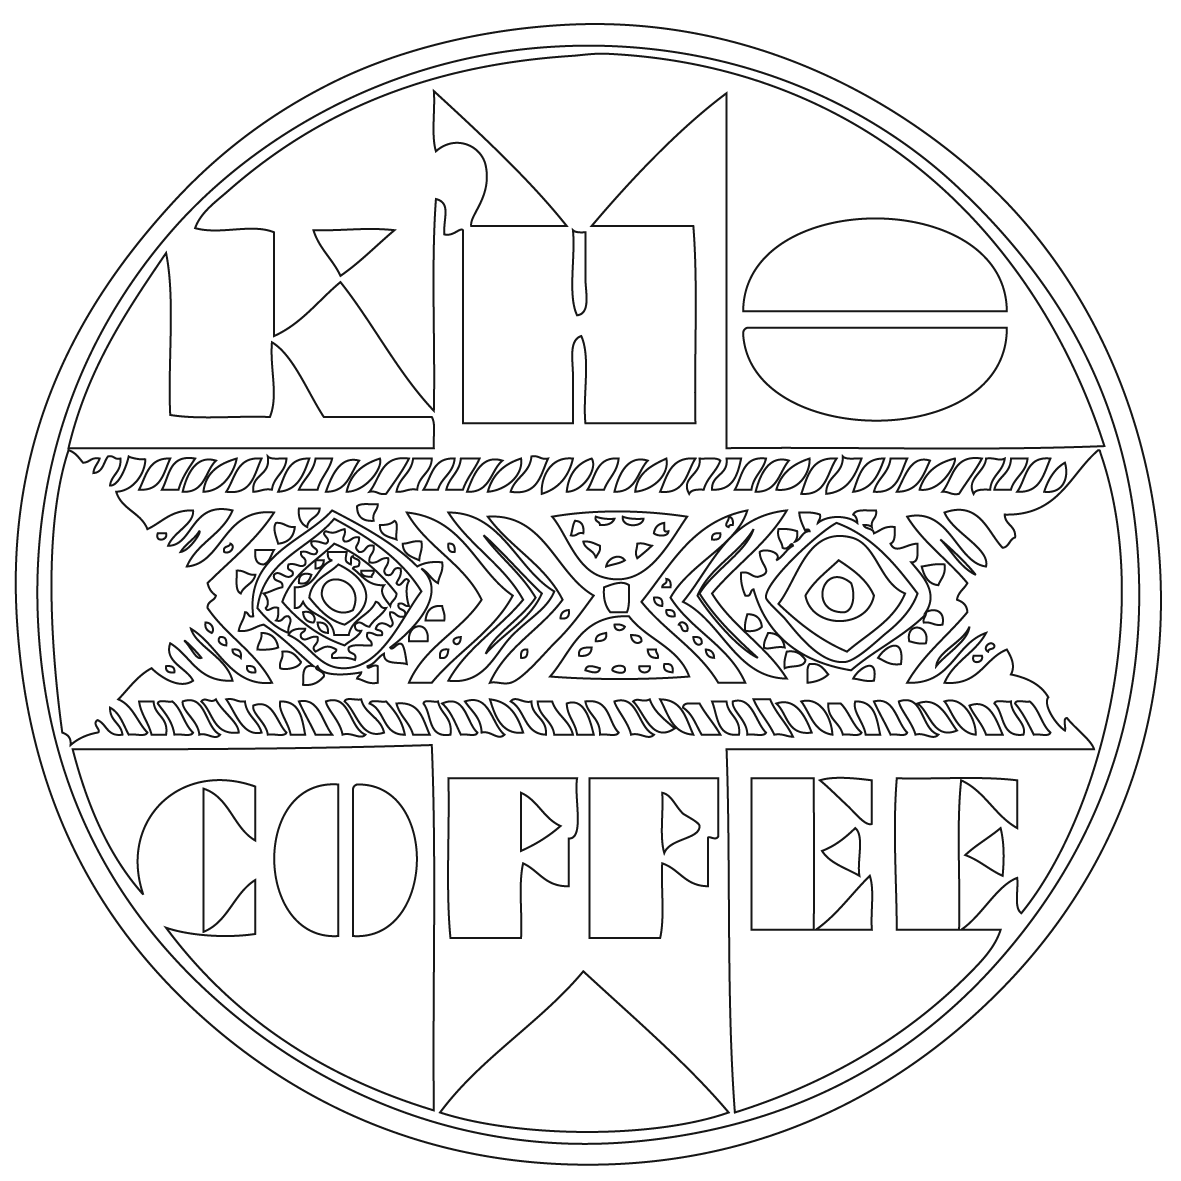 With a Half Circle Mountain Logo - K'Ho Coffee, The Montagnards, a group of ethnic minority K'Ho tribes